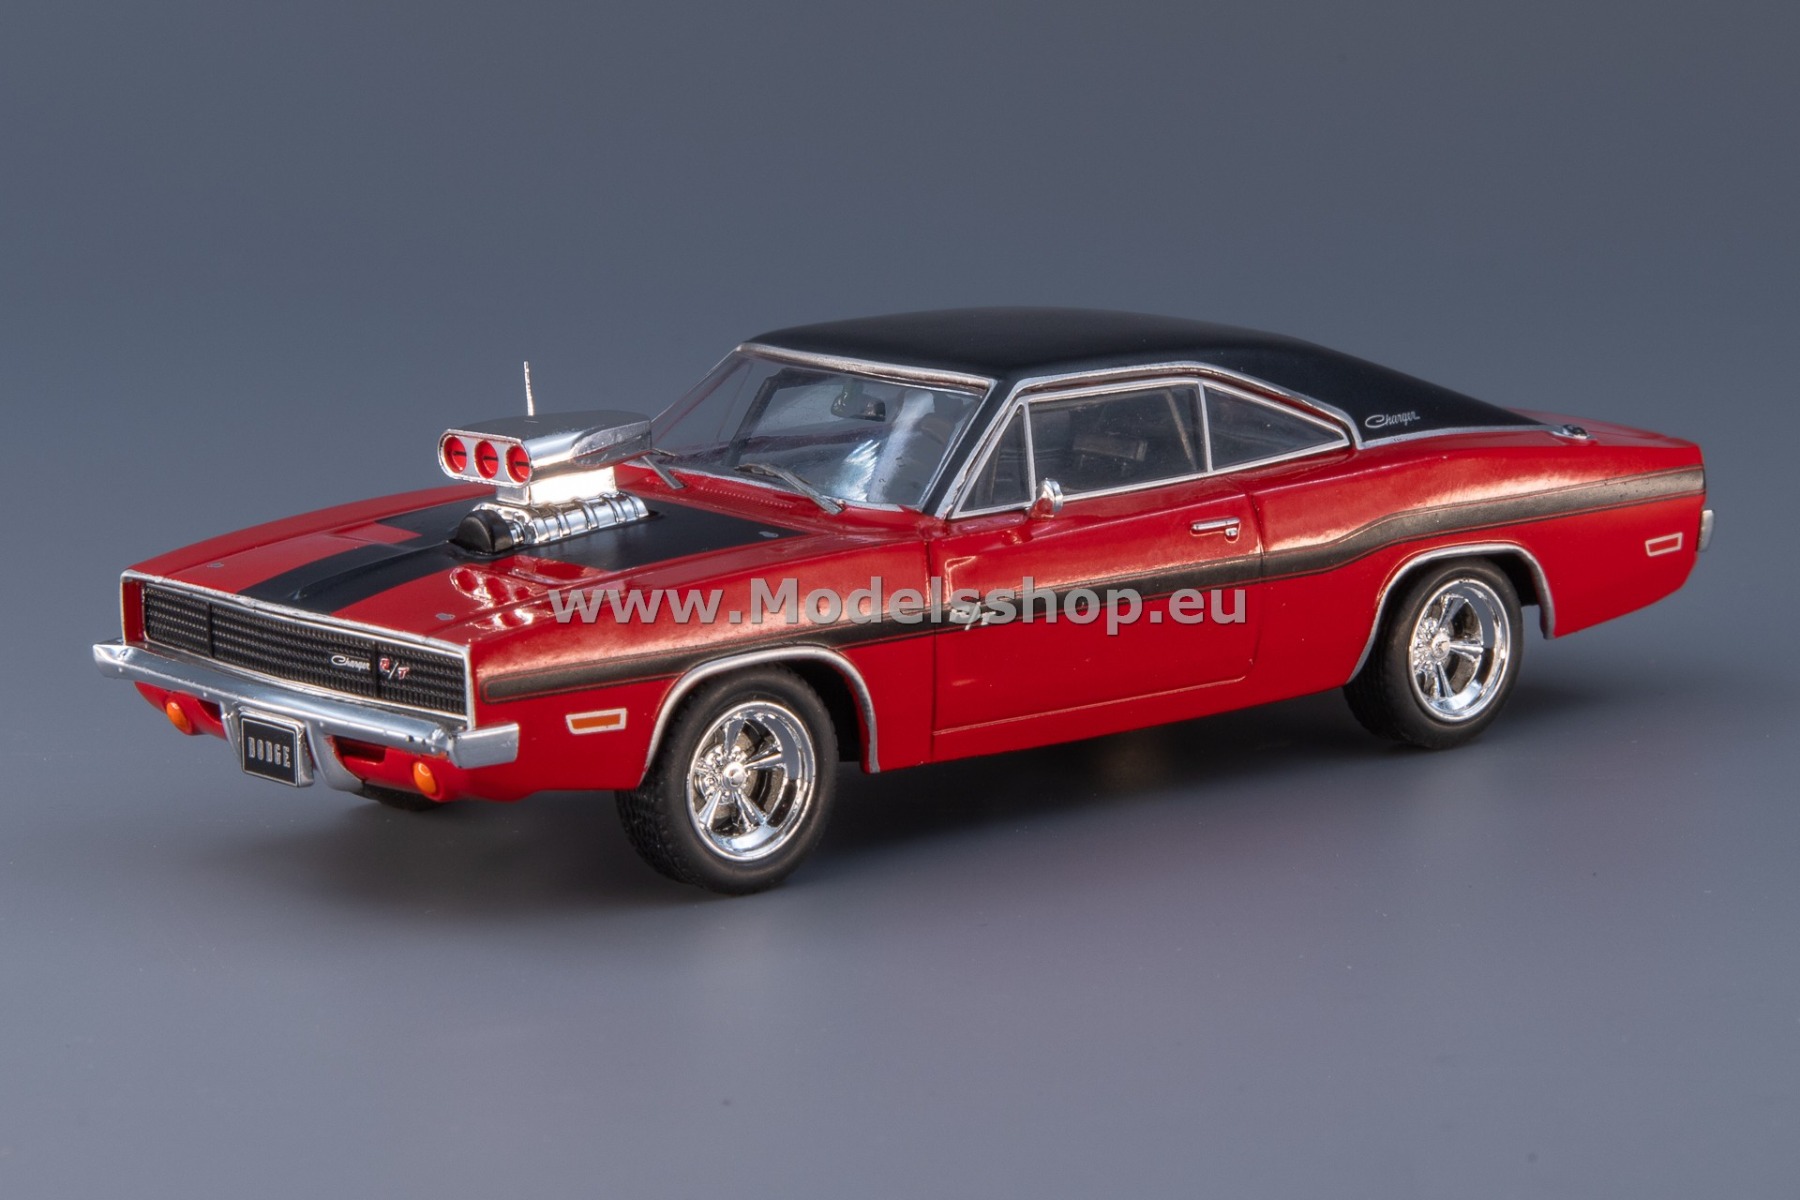 IXOCLC475N.22 Dodge Charger R/T, 1970 /red - black/